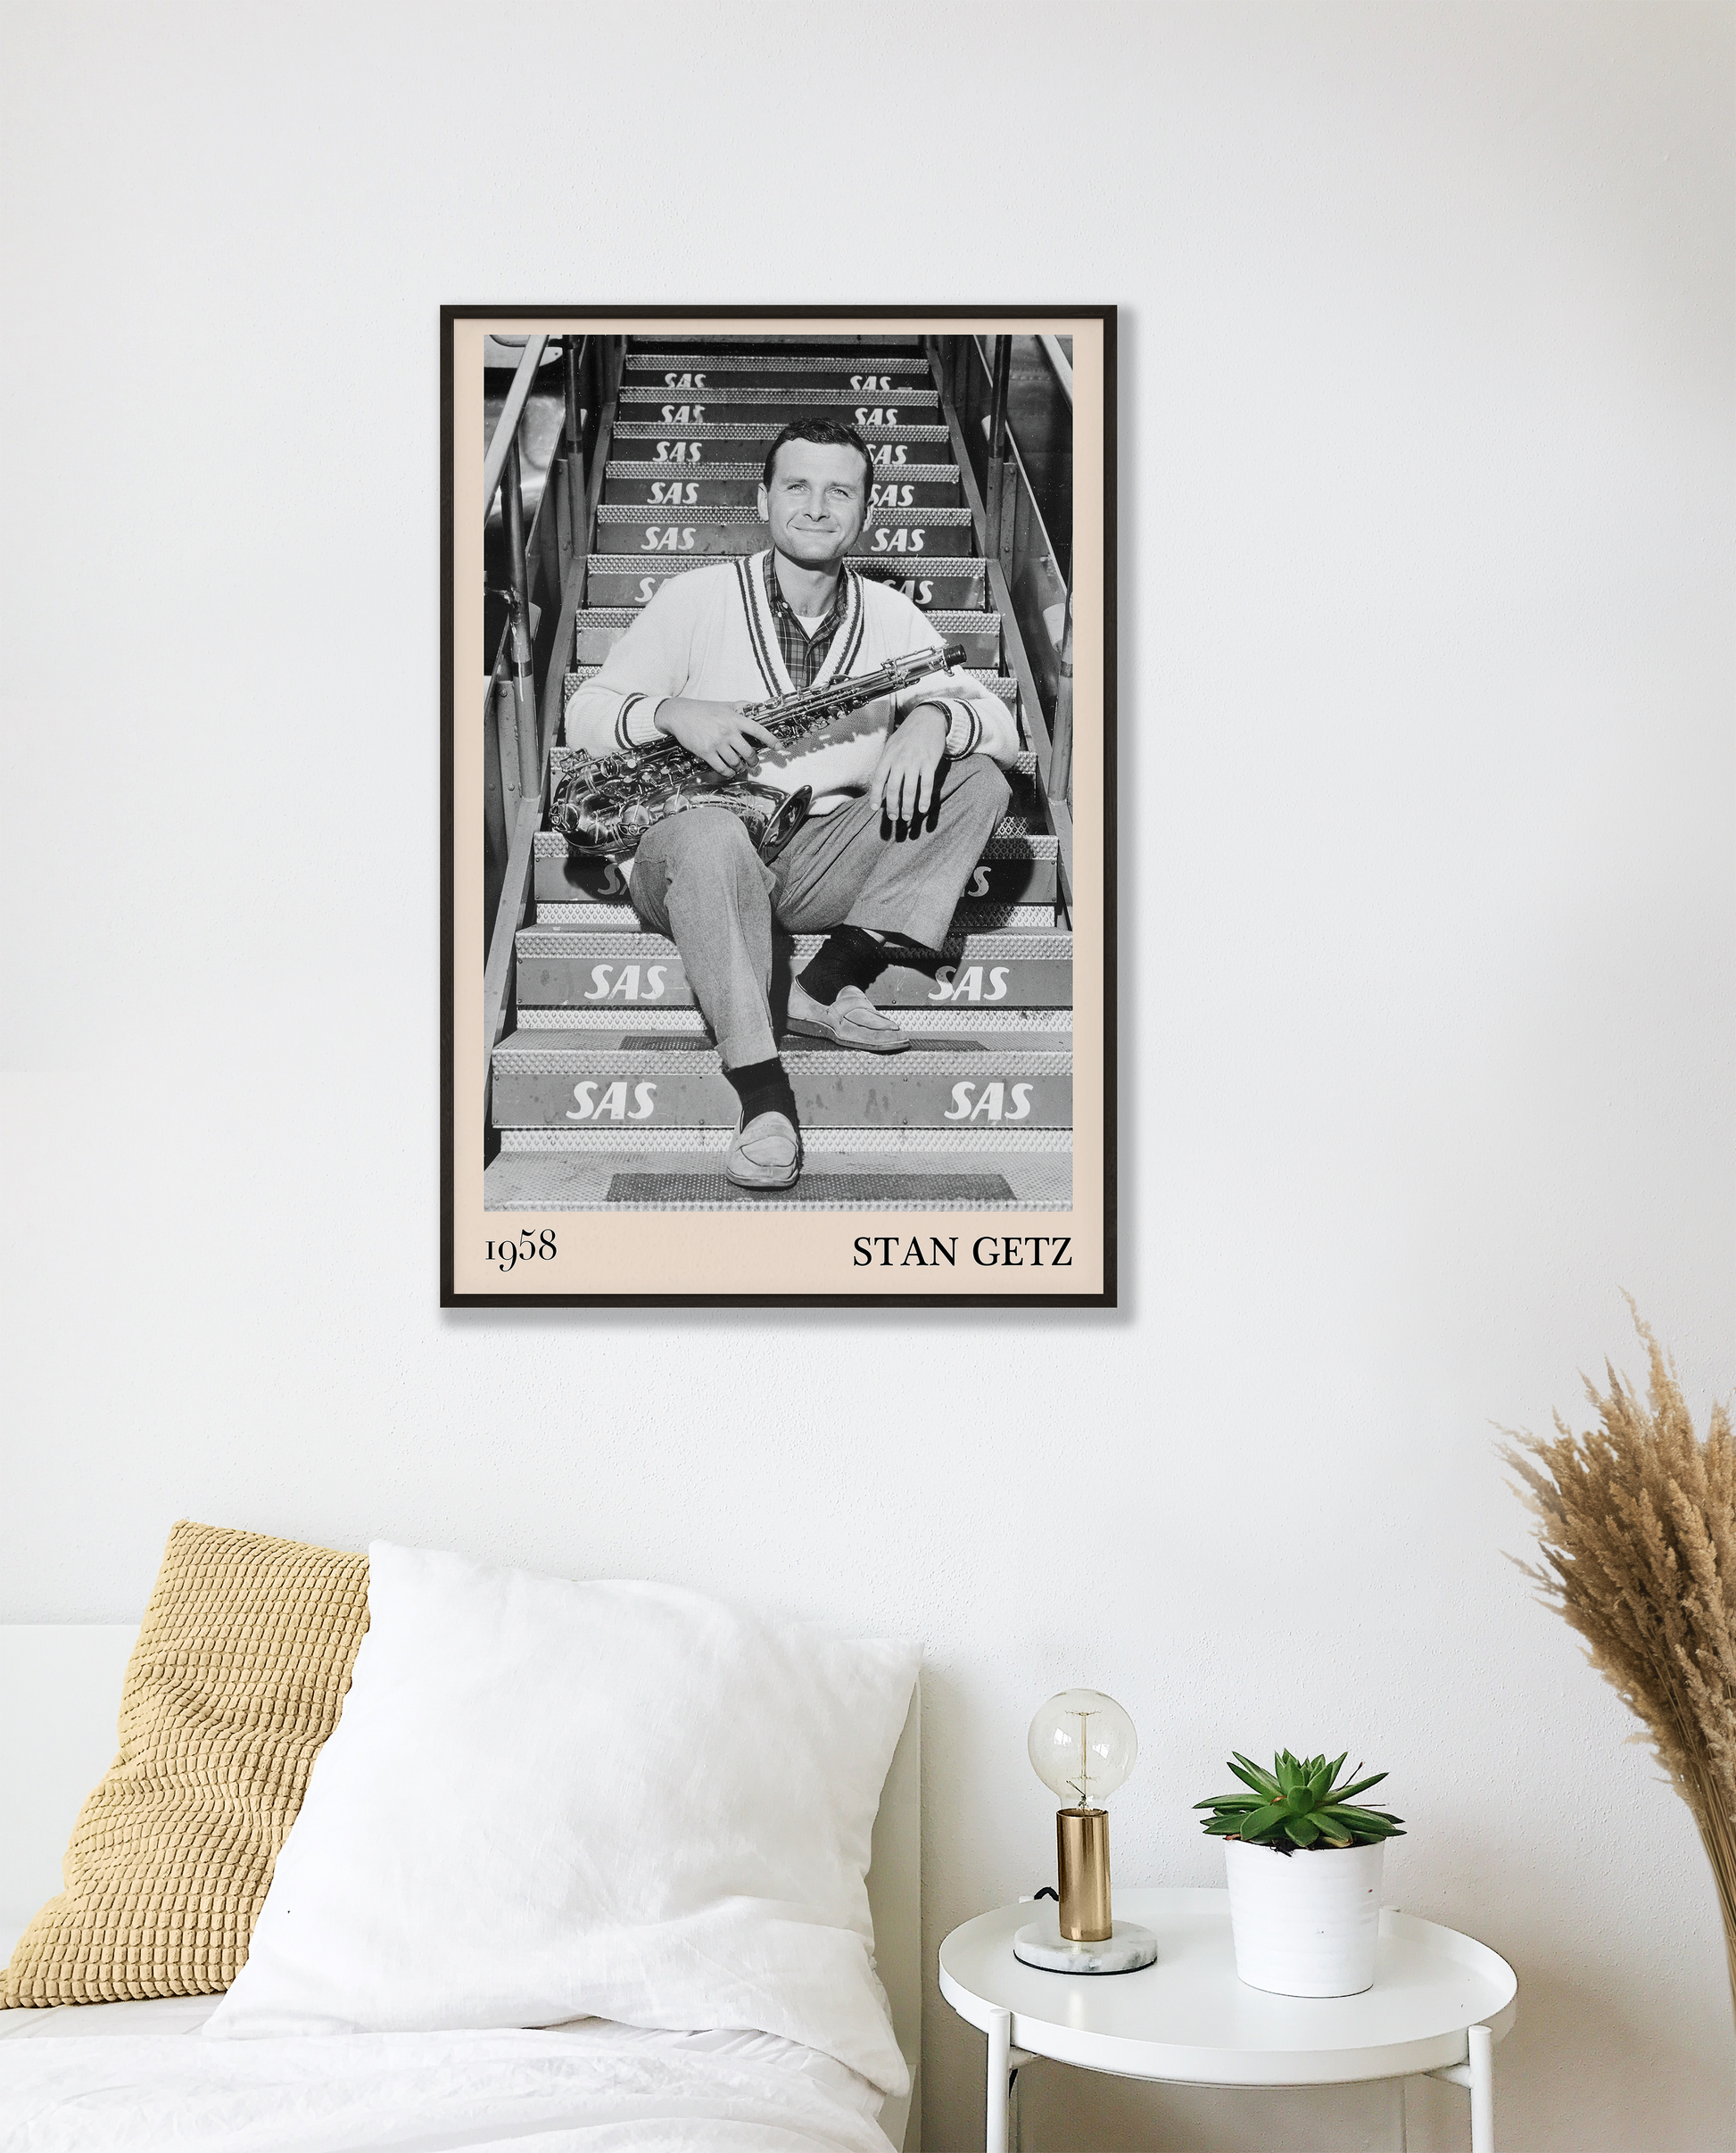 1958 picture of Stan Getz holding his saxophone. Picture crafted into a cool black framed music poster, with an off-white border. Poster is hanging on a white bedroom wall